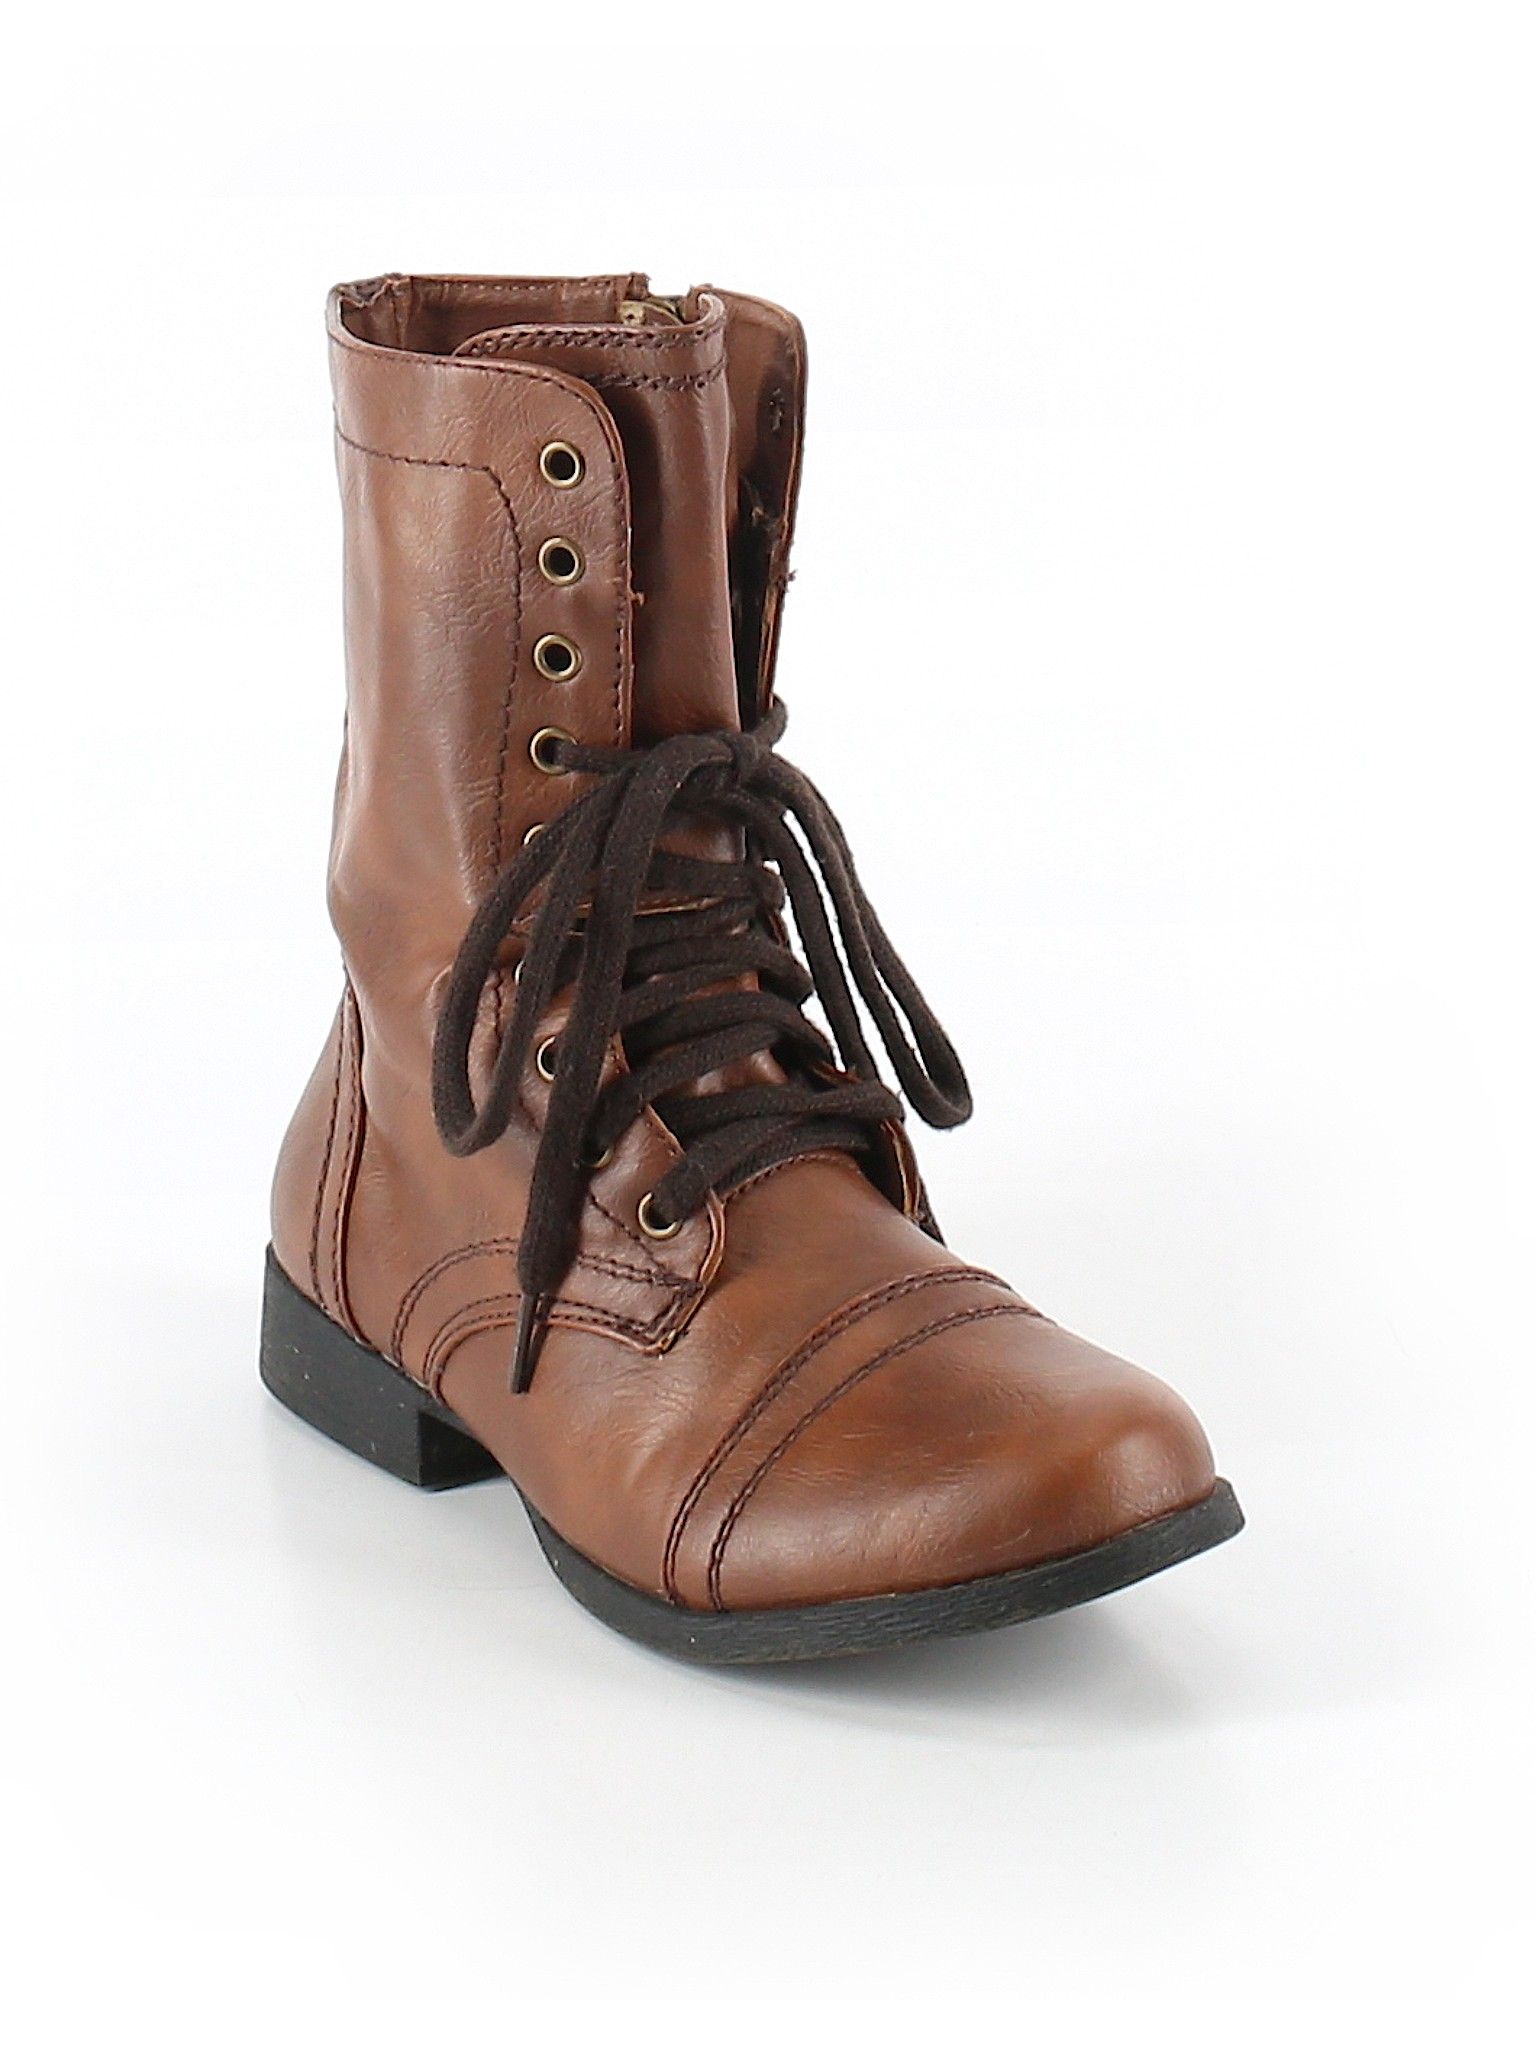 Madden Girl Boots Size 6: Brown Women's Clothing - 41392966 | thredUP